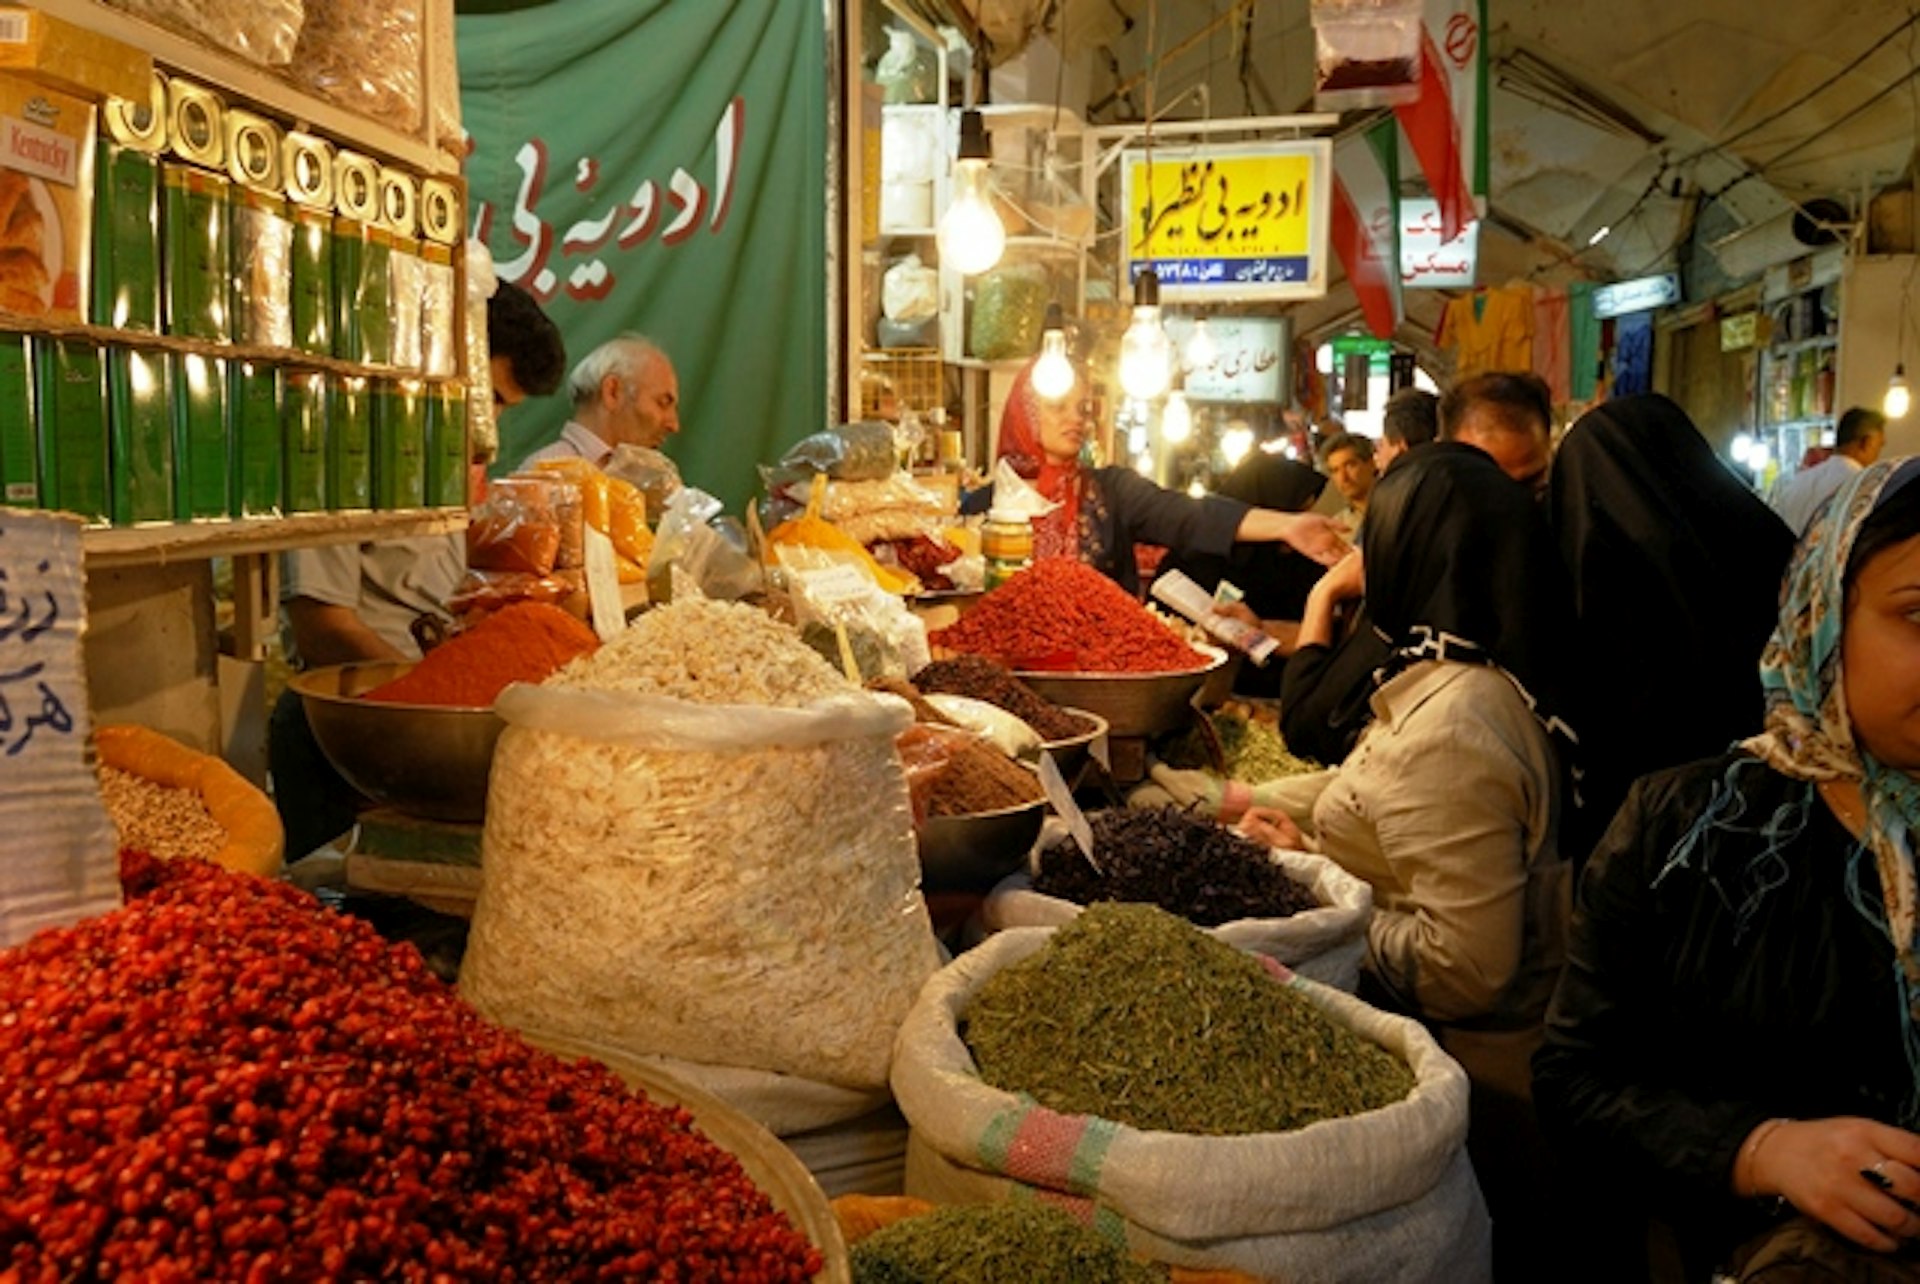 Shopping for spices in Tabriz. Image by Getty/Photolibrary/Paul Nevin